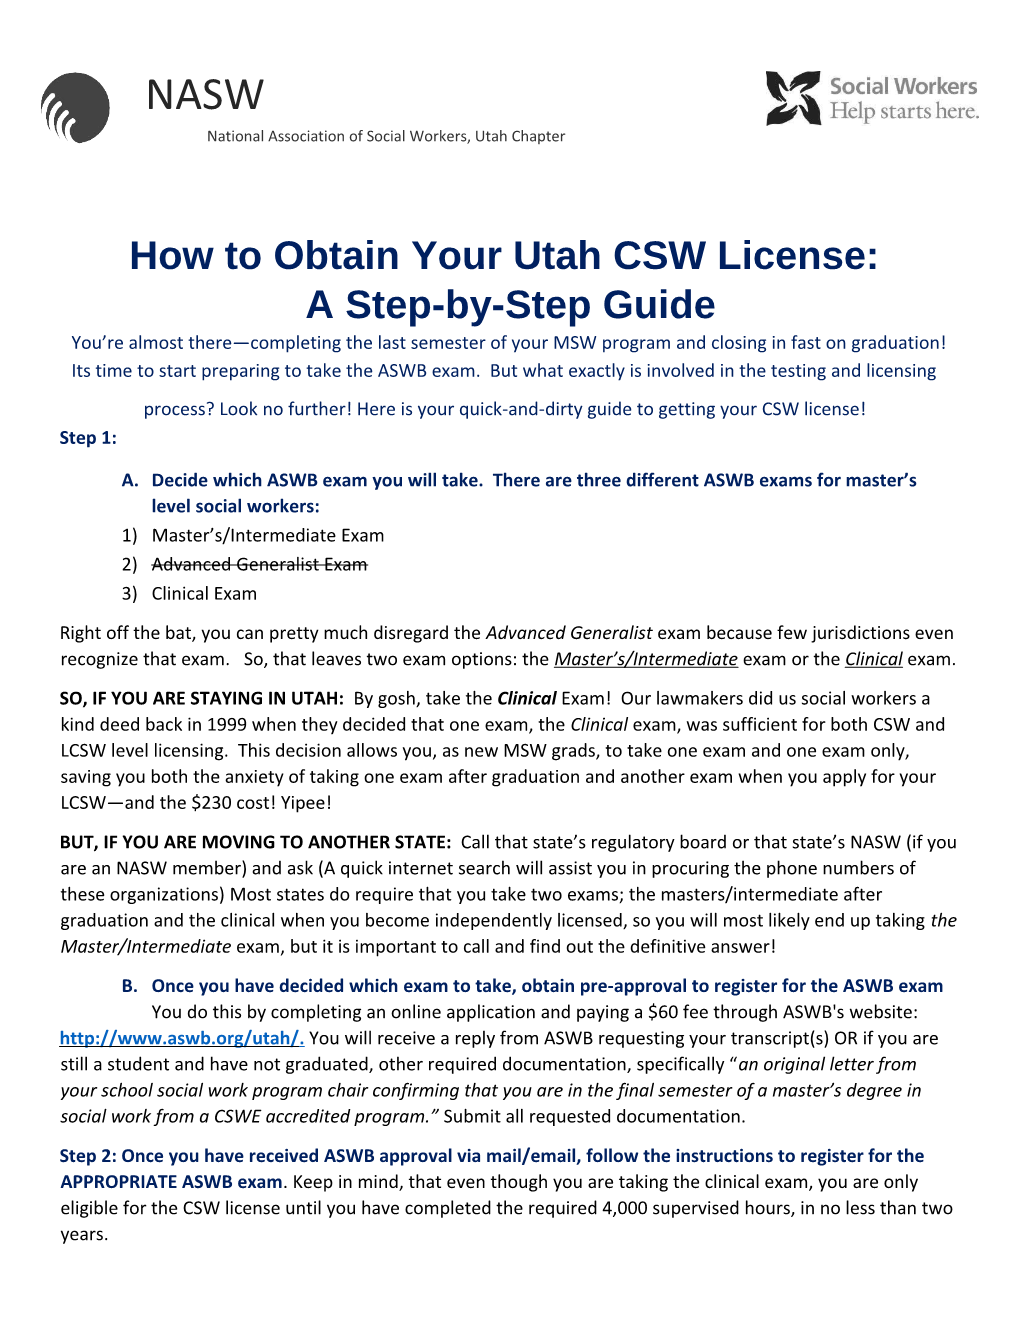 How to Obtain Your Utah CSW License: a Step-By-Step Guide